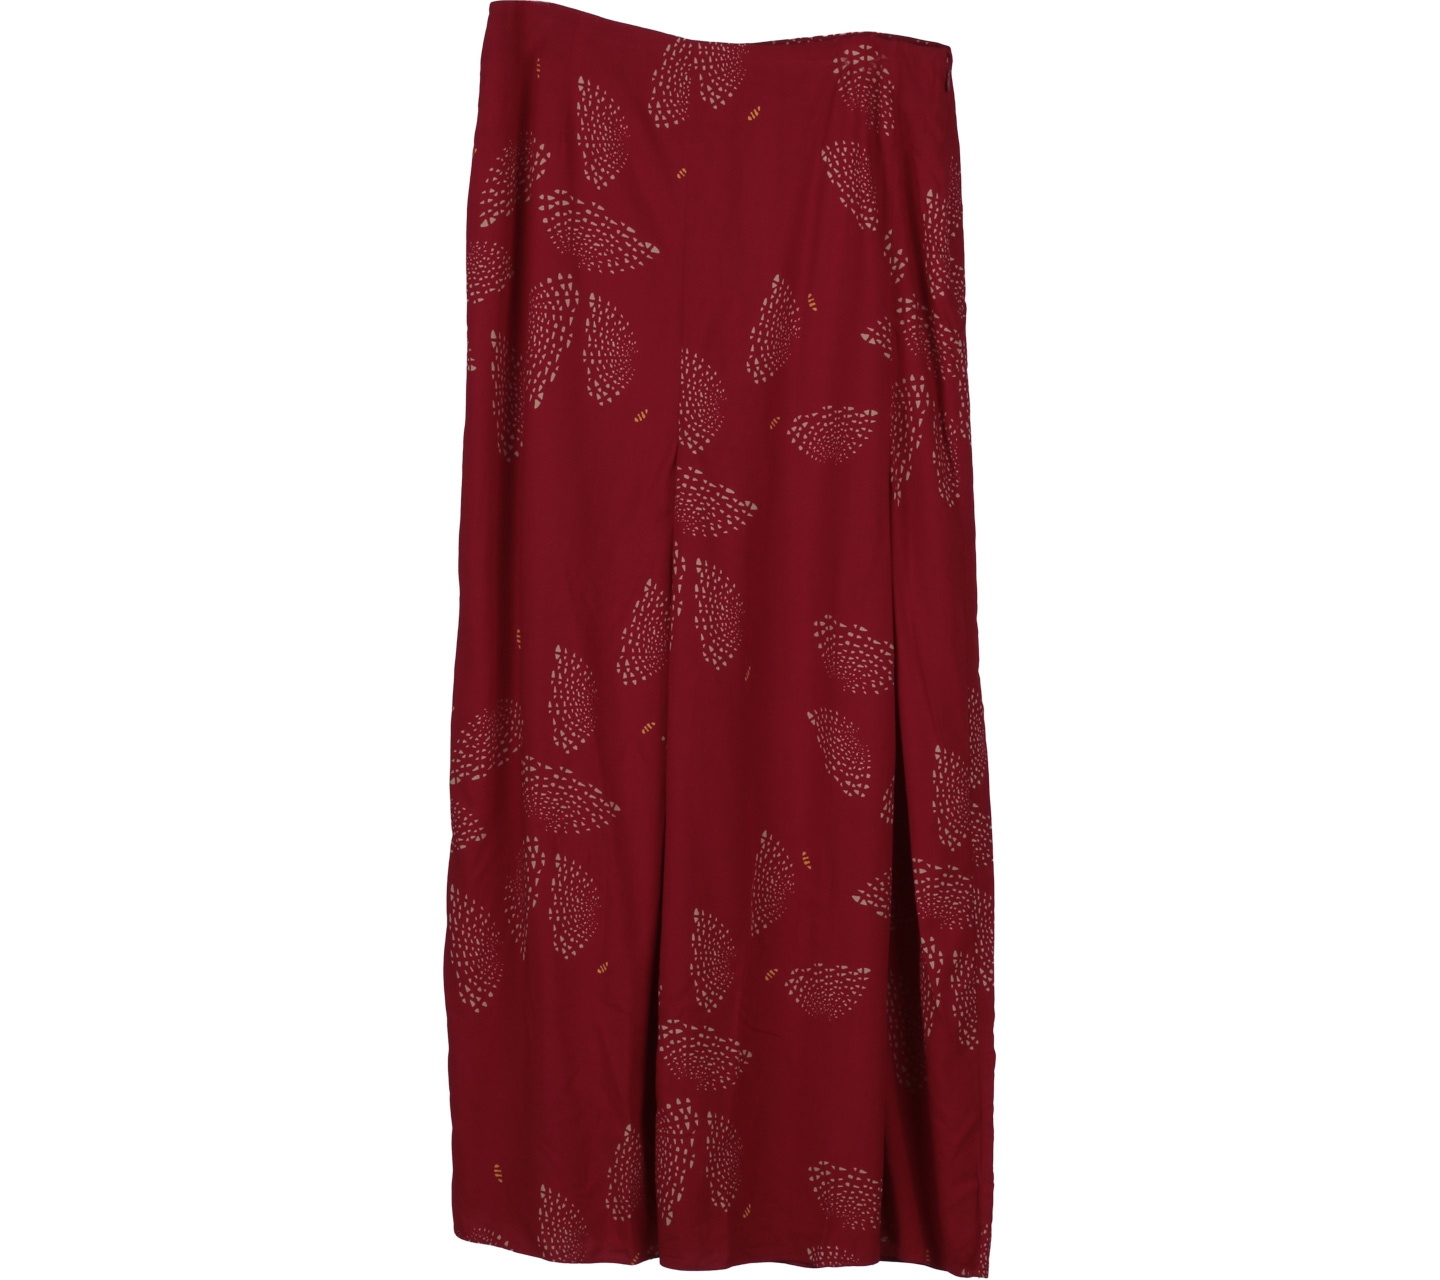 UNIQLO Red Skirt